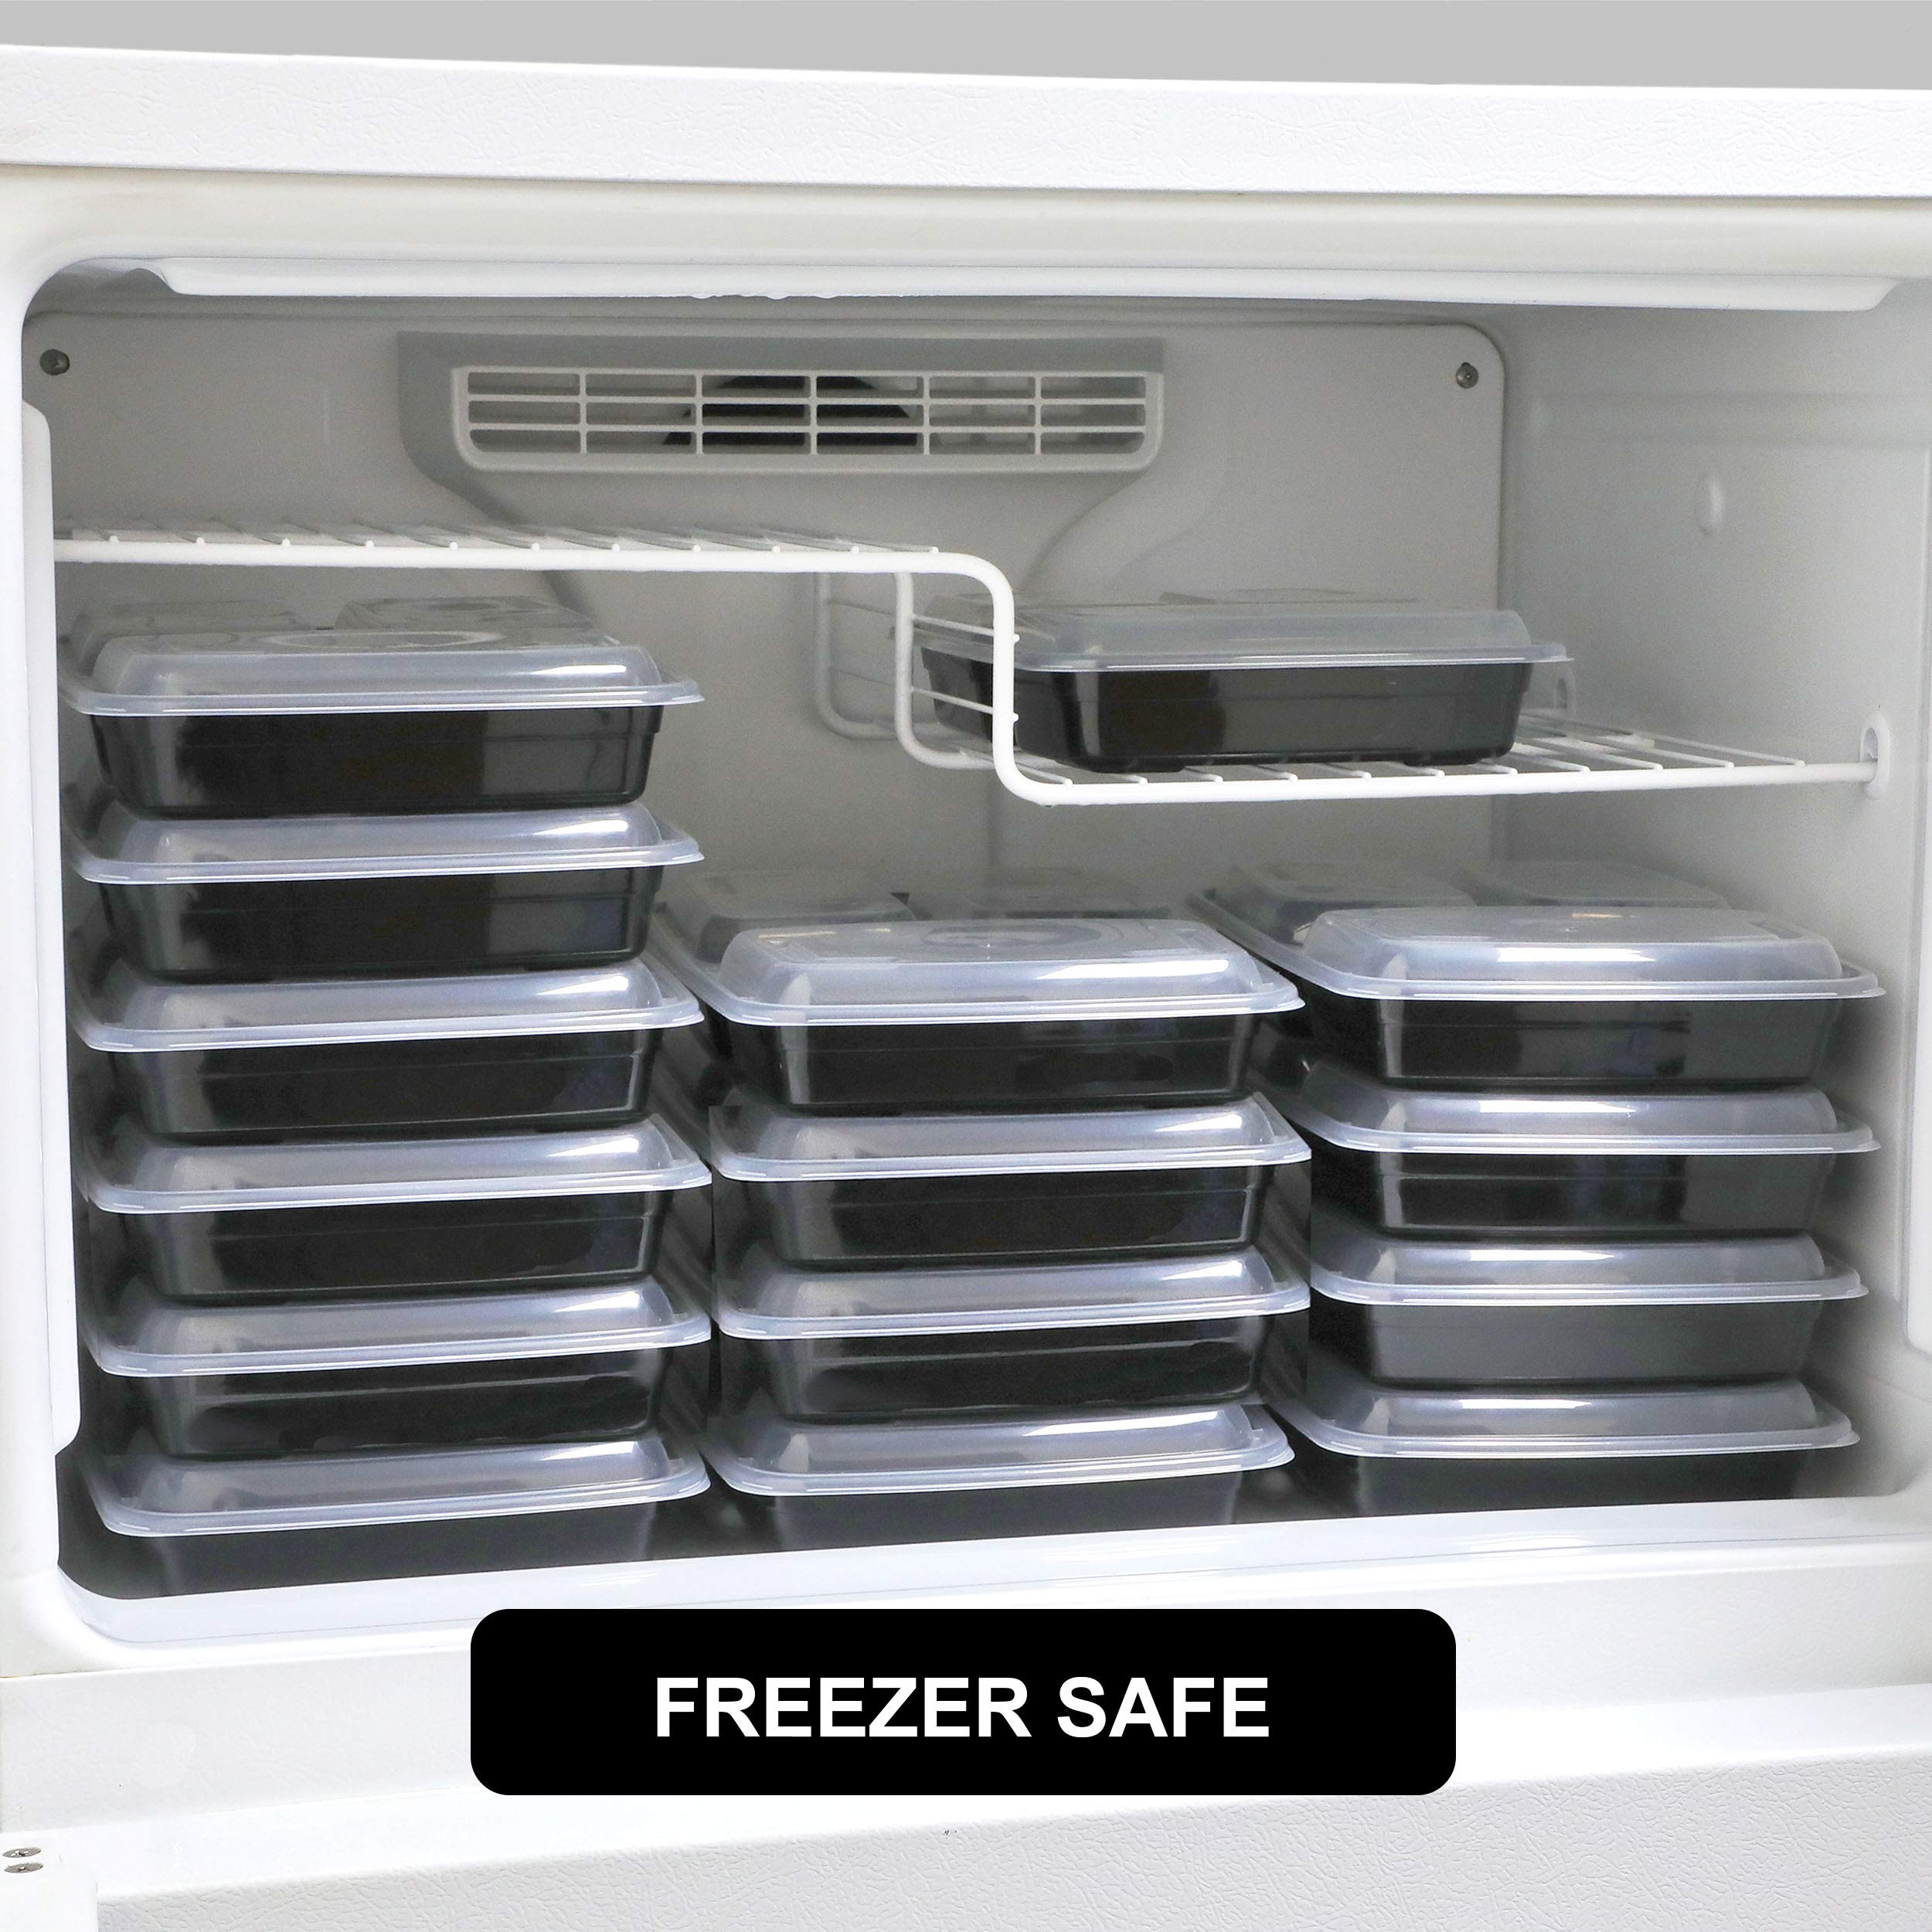 Looking to avoid] Large stainless steel oven, dishwasher, freezer safe meal  prep containers? Looking for something that's large enough to put 2 whiting  plus some vegetables straight from the freezer to the